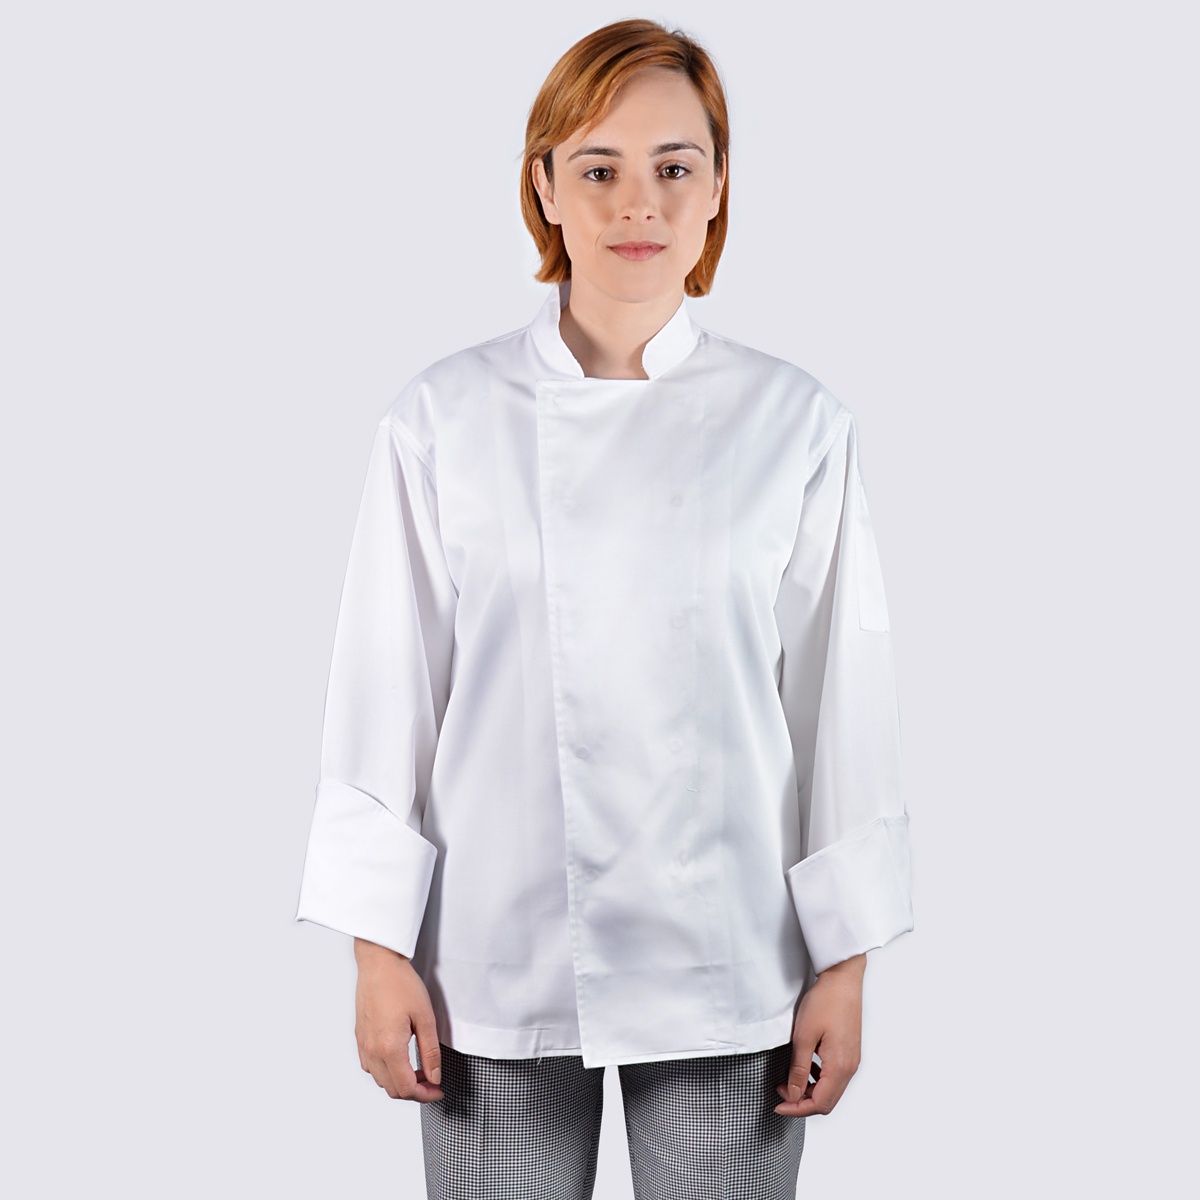 chef jackets white long sleeve wth stud buttons